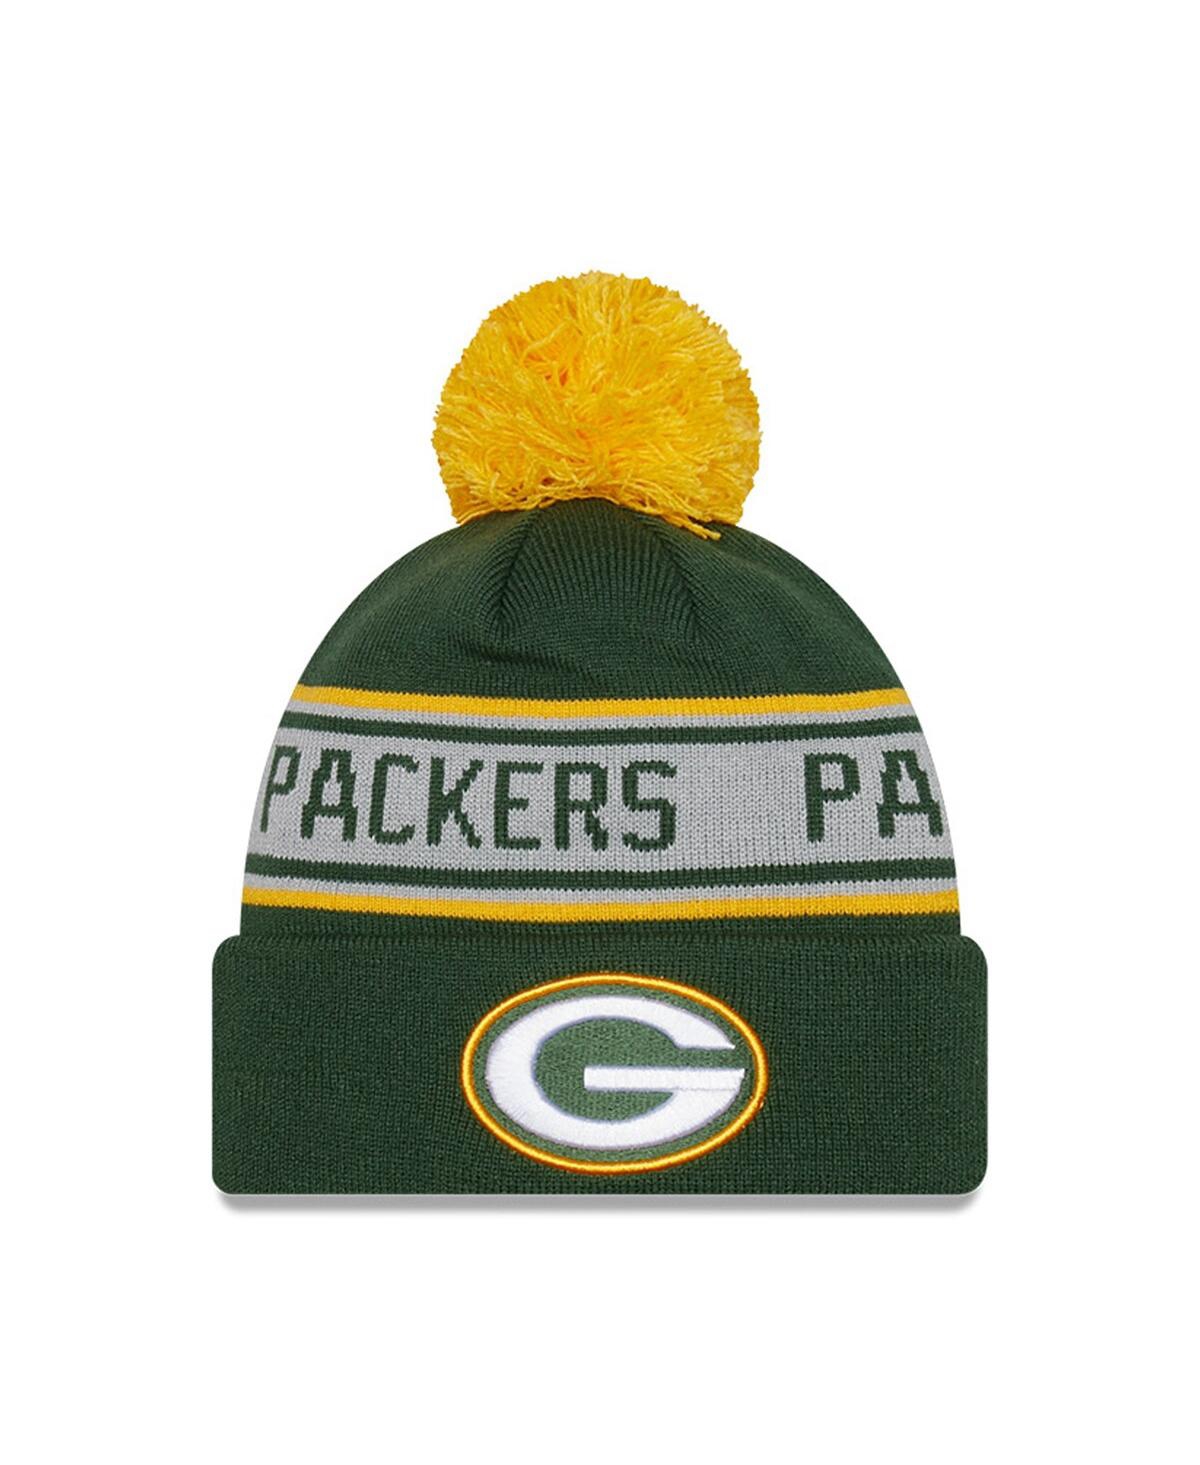 New Era Babies' Preschool Boys And Girls  Green Green Bay Packers Repeat Cuffed Knit Hat With Pom